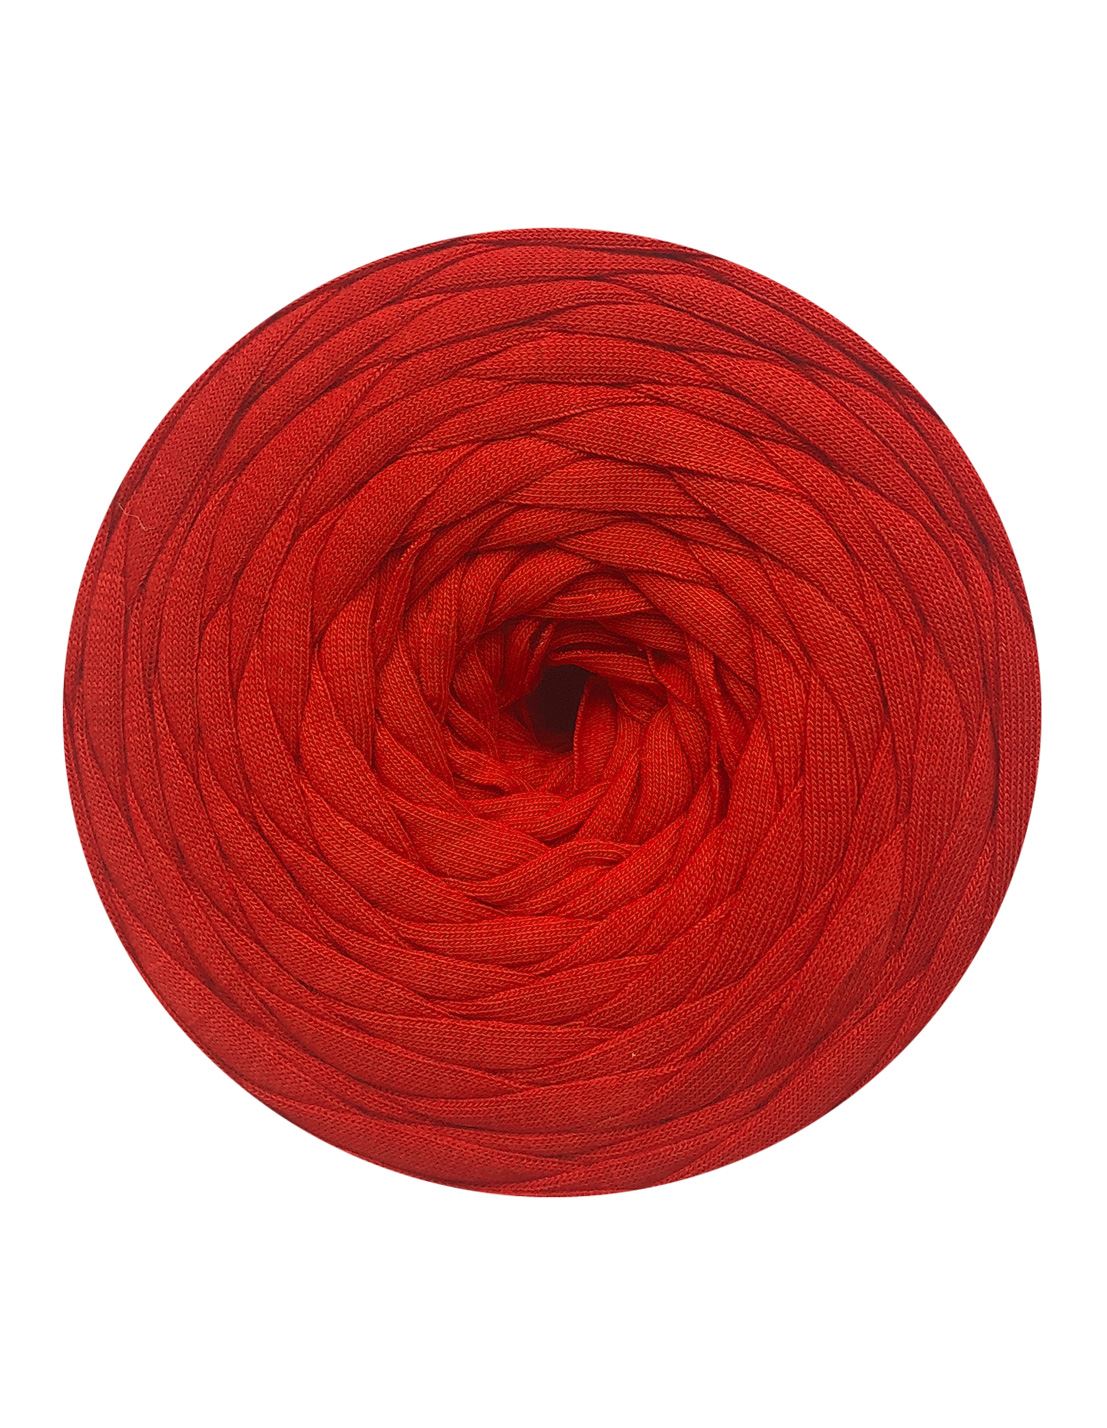 Lipstick Red Jersey Be Good t-shirt yarn by Wool and the Gang (500g)